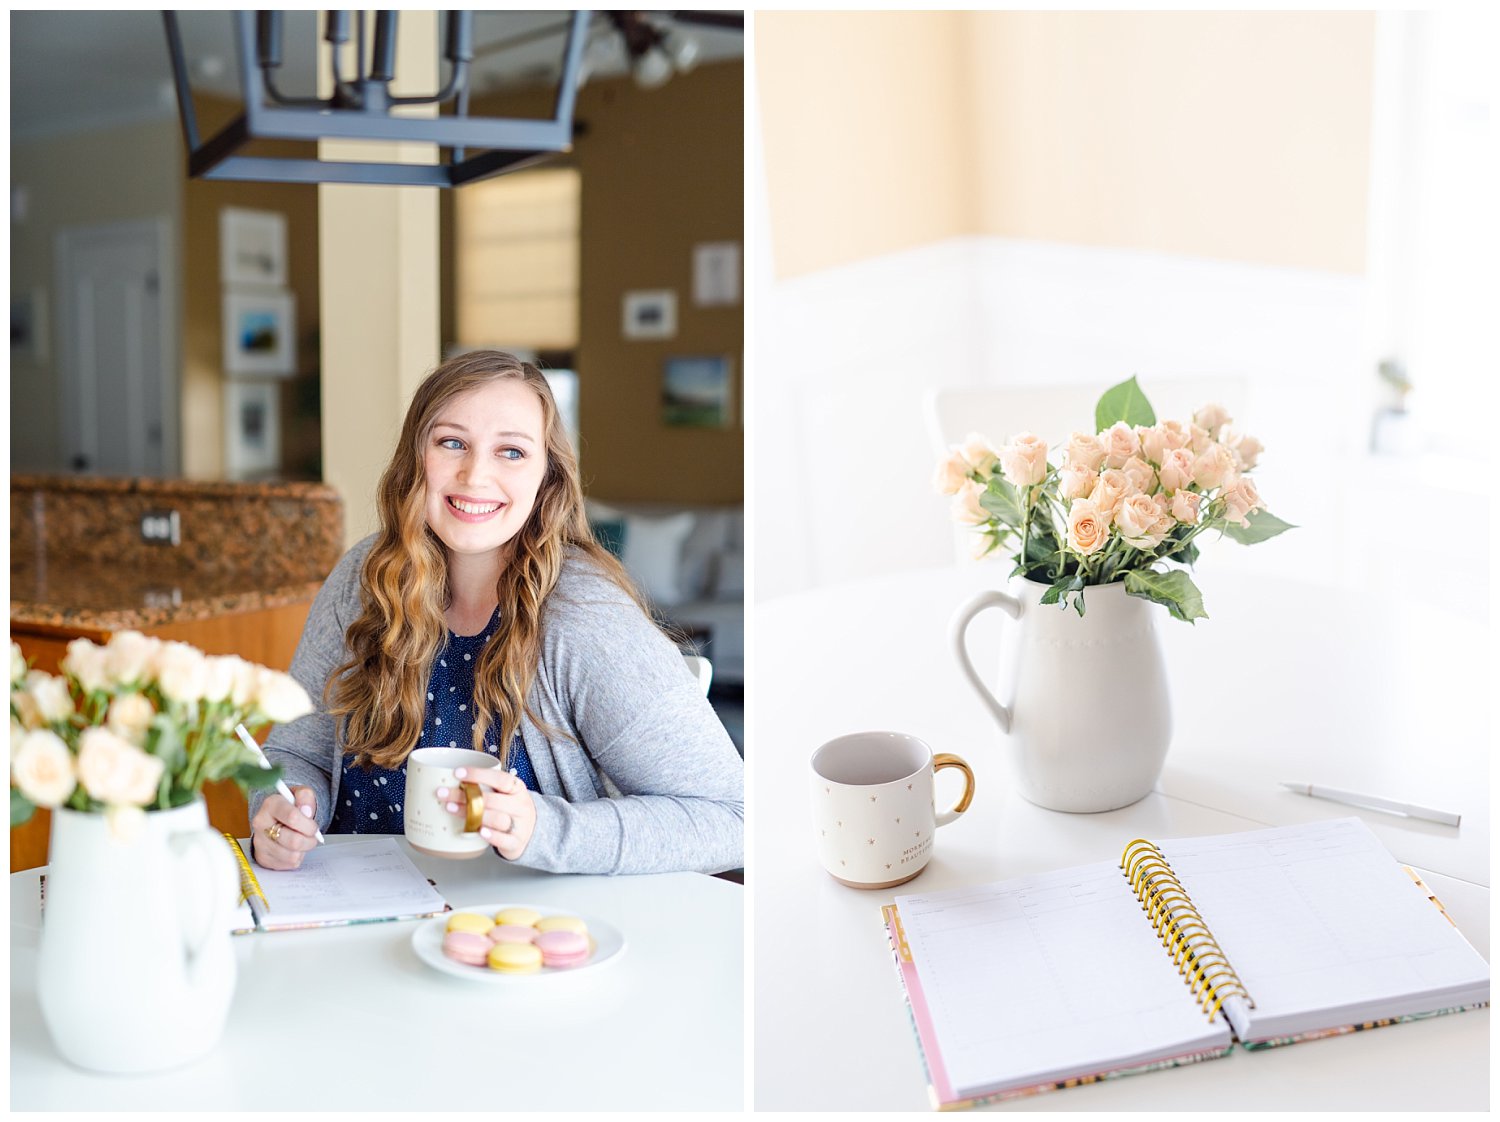 How you can work from home tips Samantha Laffoon Photography